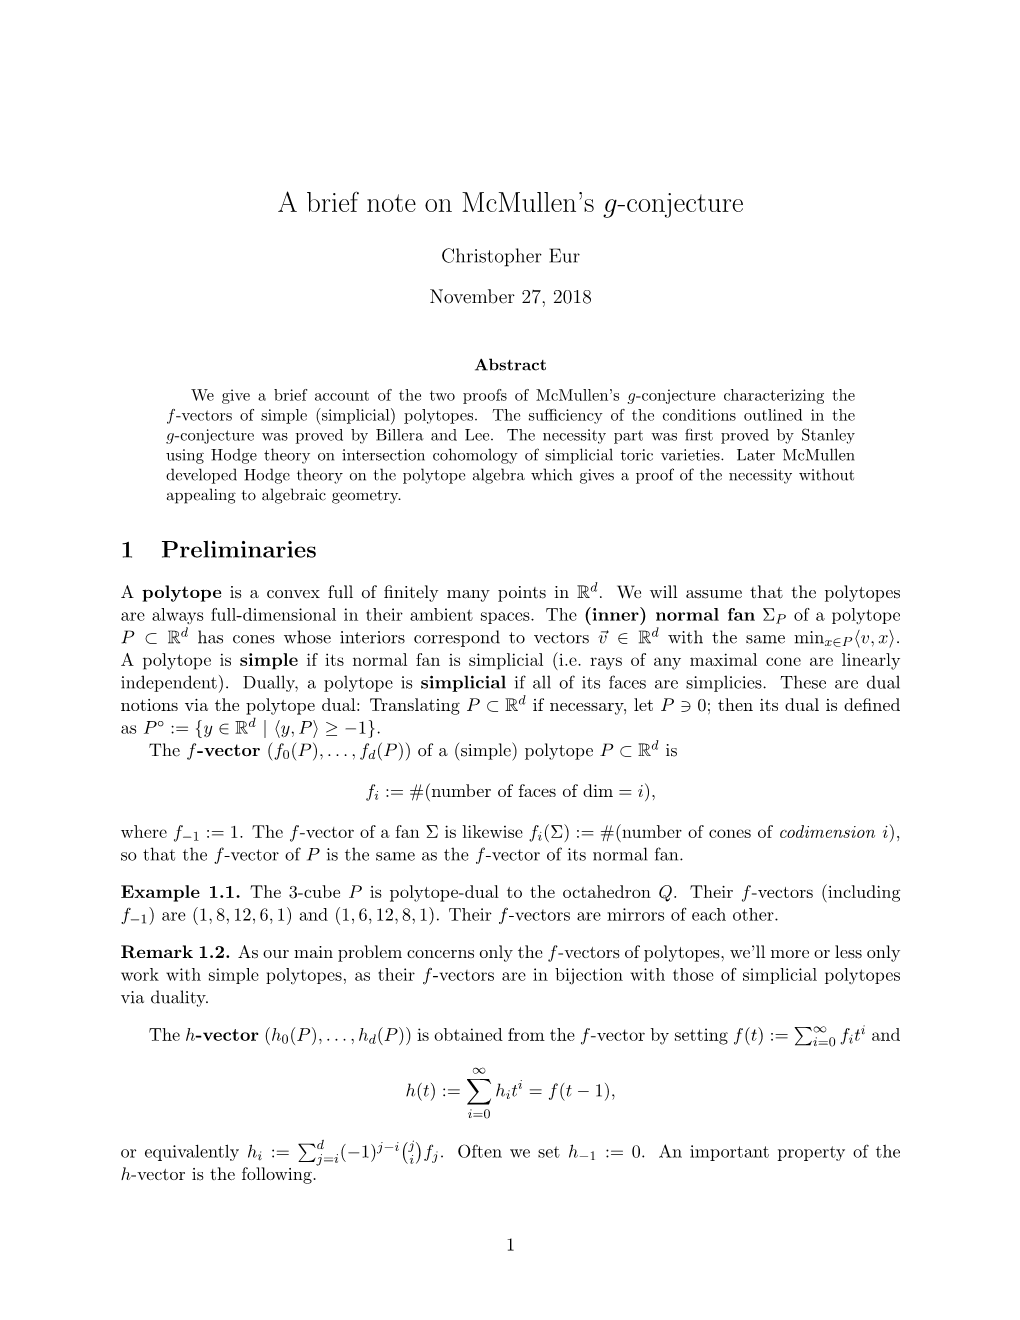 A Brief Note on Mcmullen's G-Conjecture